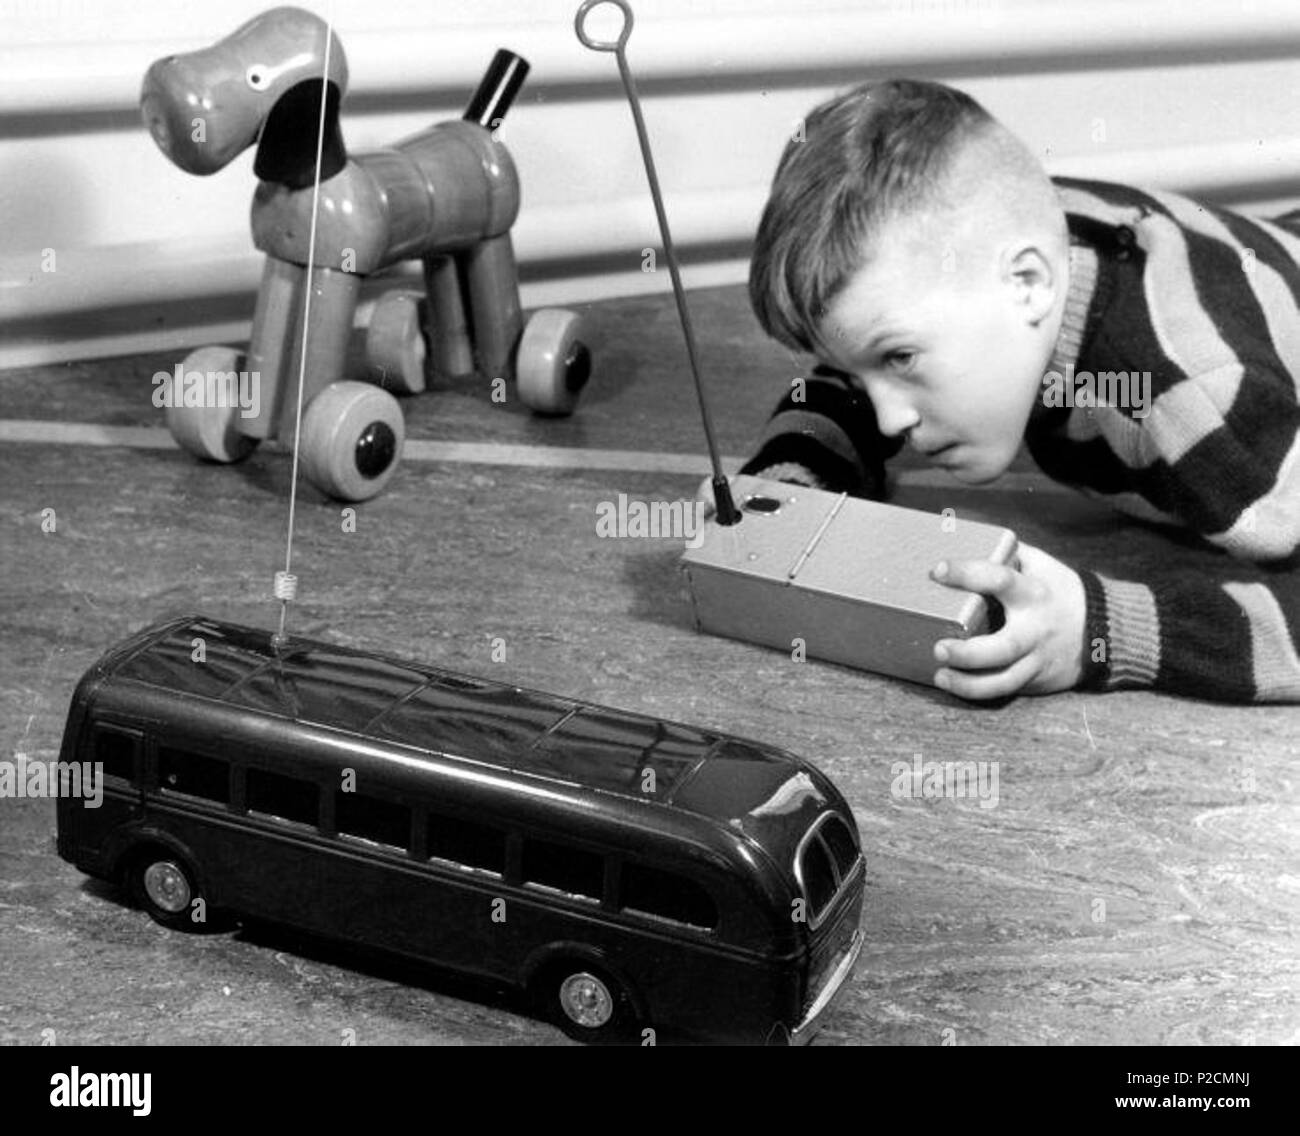 Toy Bus High Resolution Stock Photography and Images - Alamy